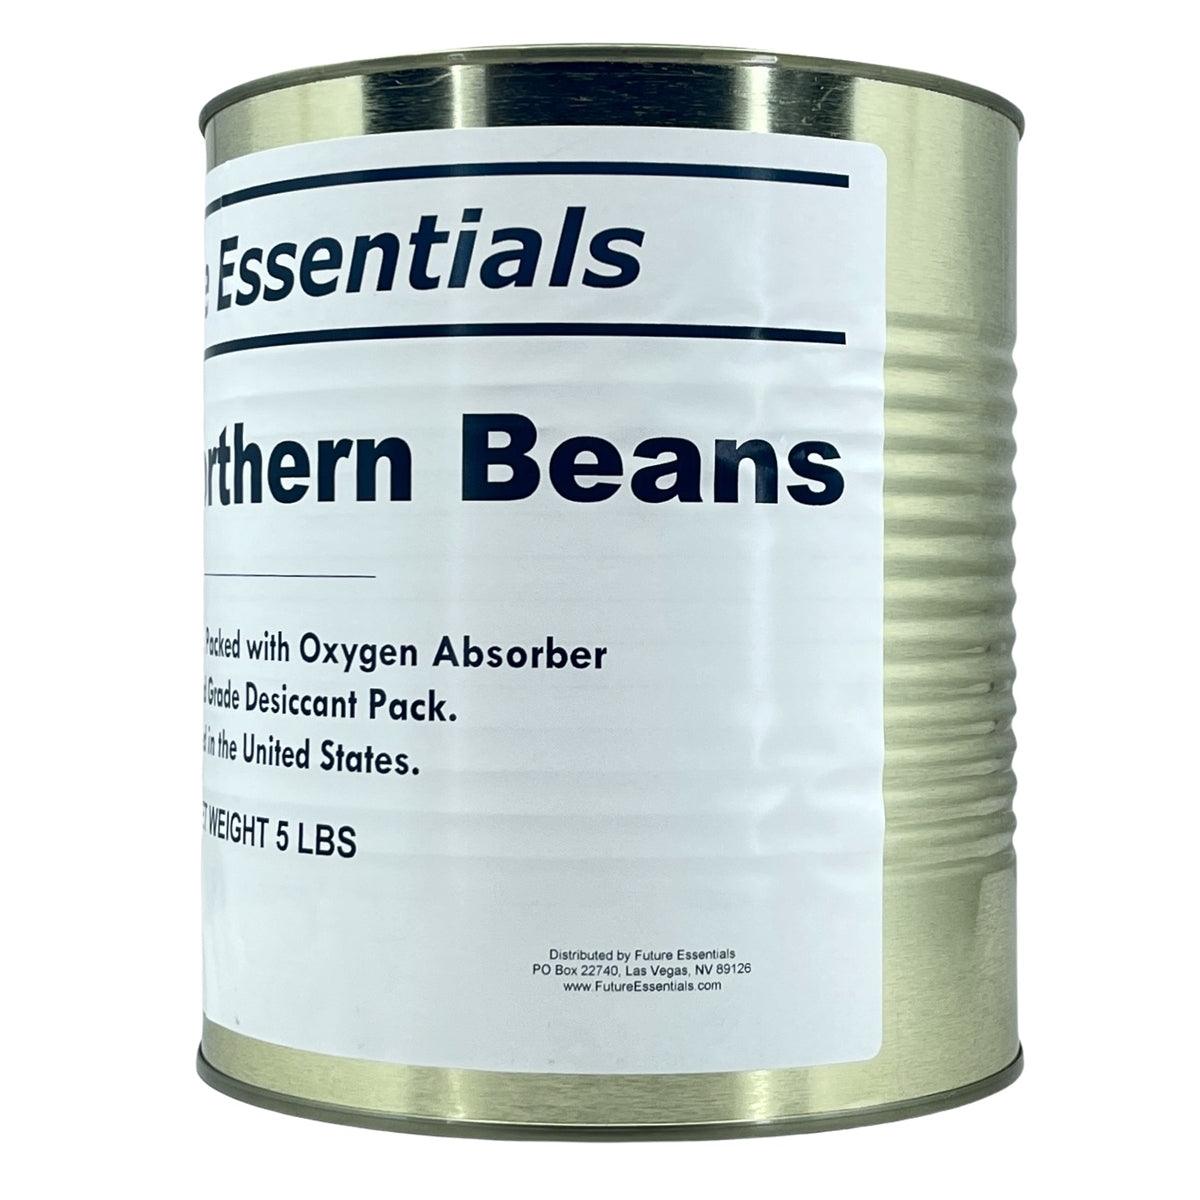 Future Essentials Great Northern Beans are free of preservatives and artificial ingredients. They are also vegan and gluten-free. Each can contains 5 pounds of freeze-dried great northern beans